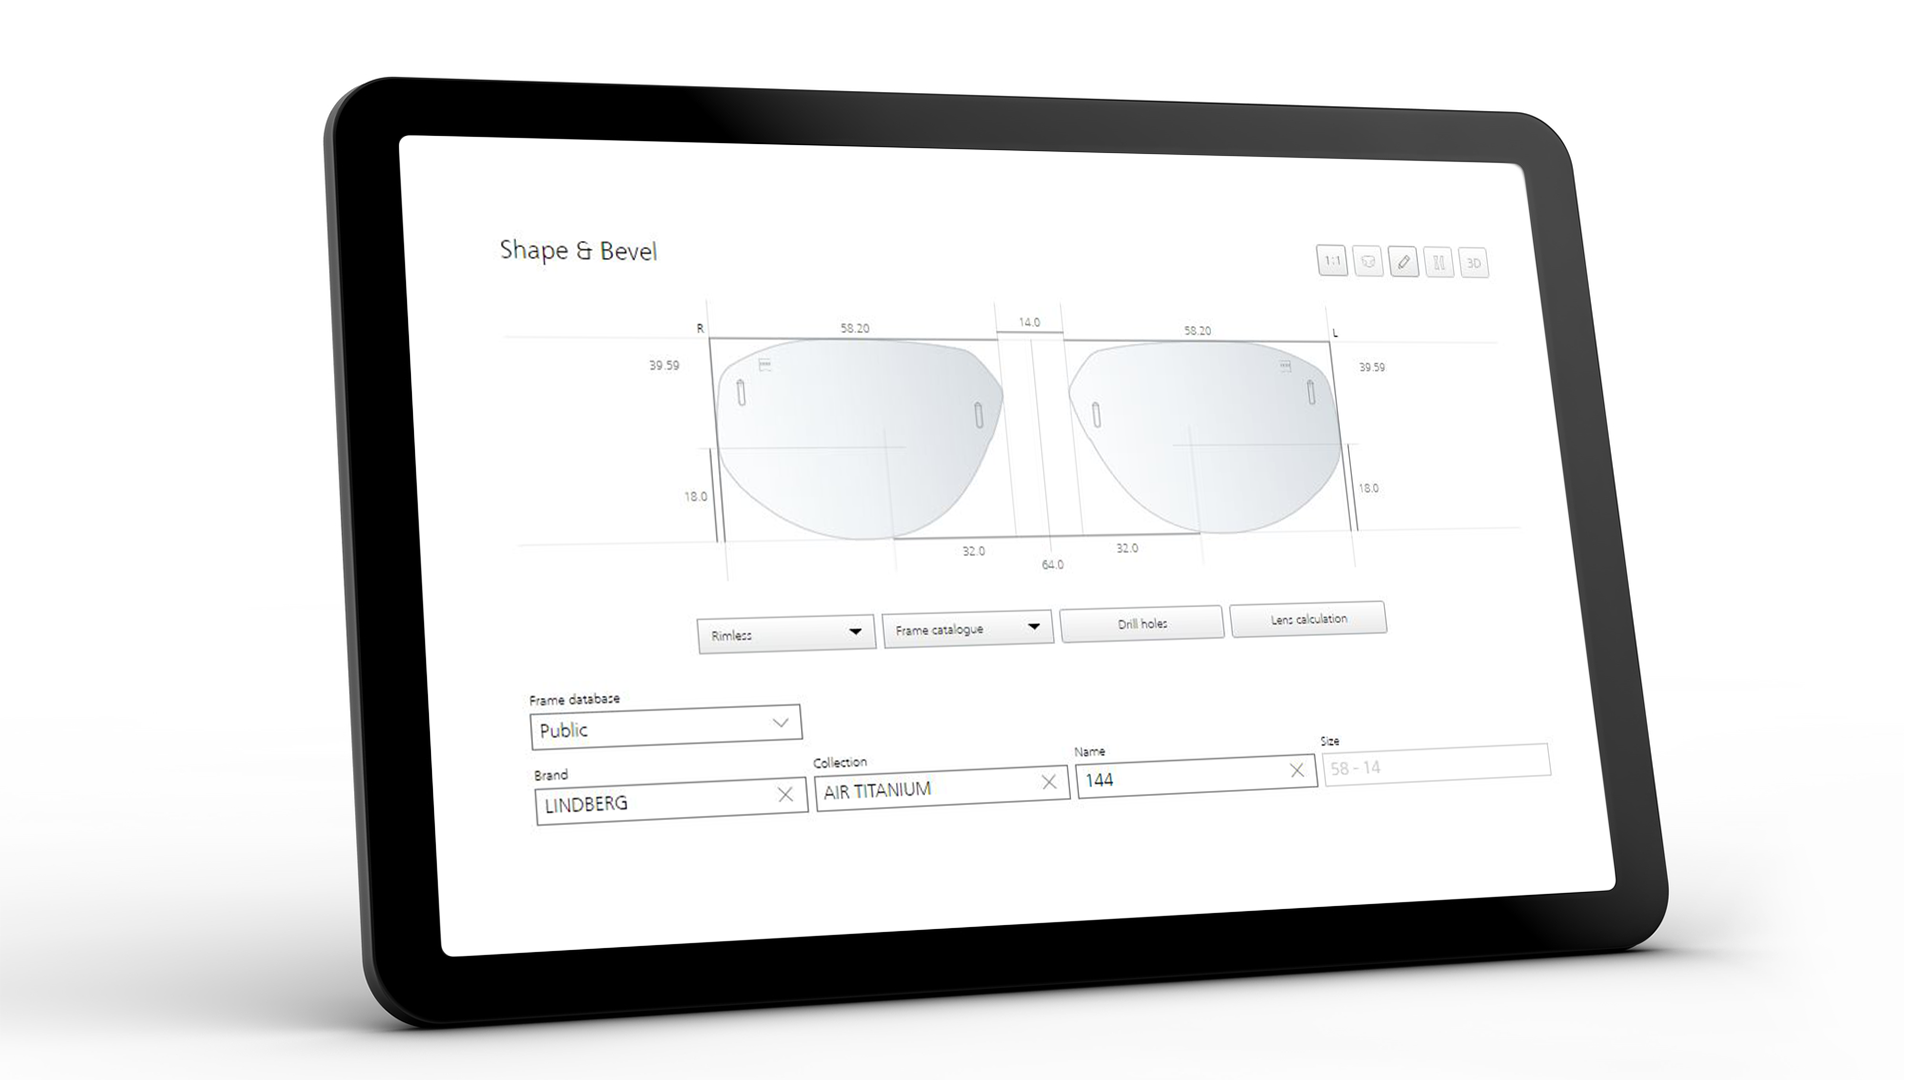 Tablet screen showing the ZEISS VISUSTORE interface for shape and bevel 